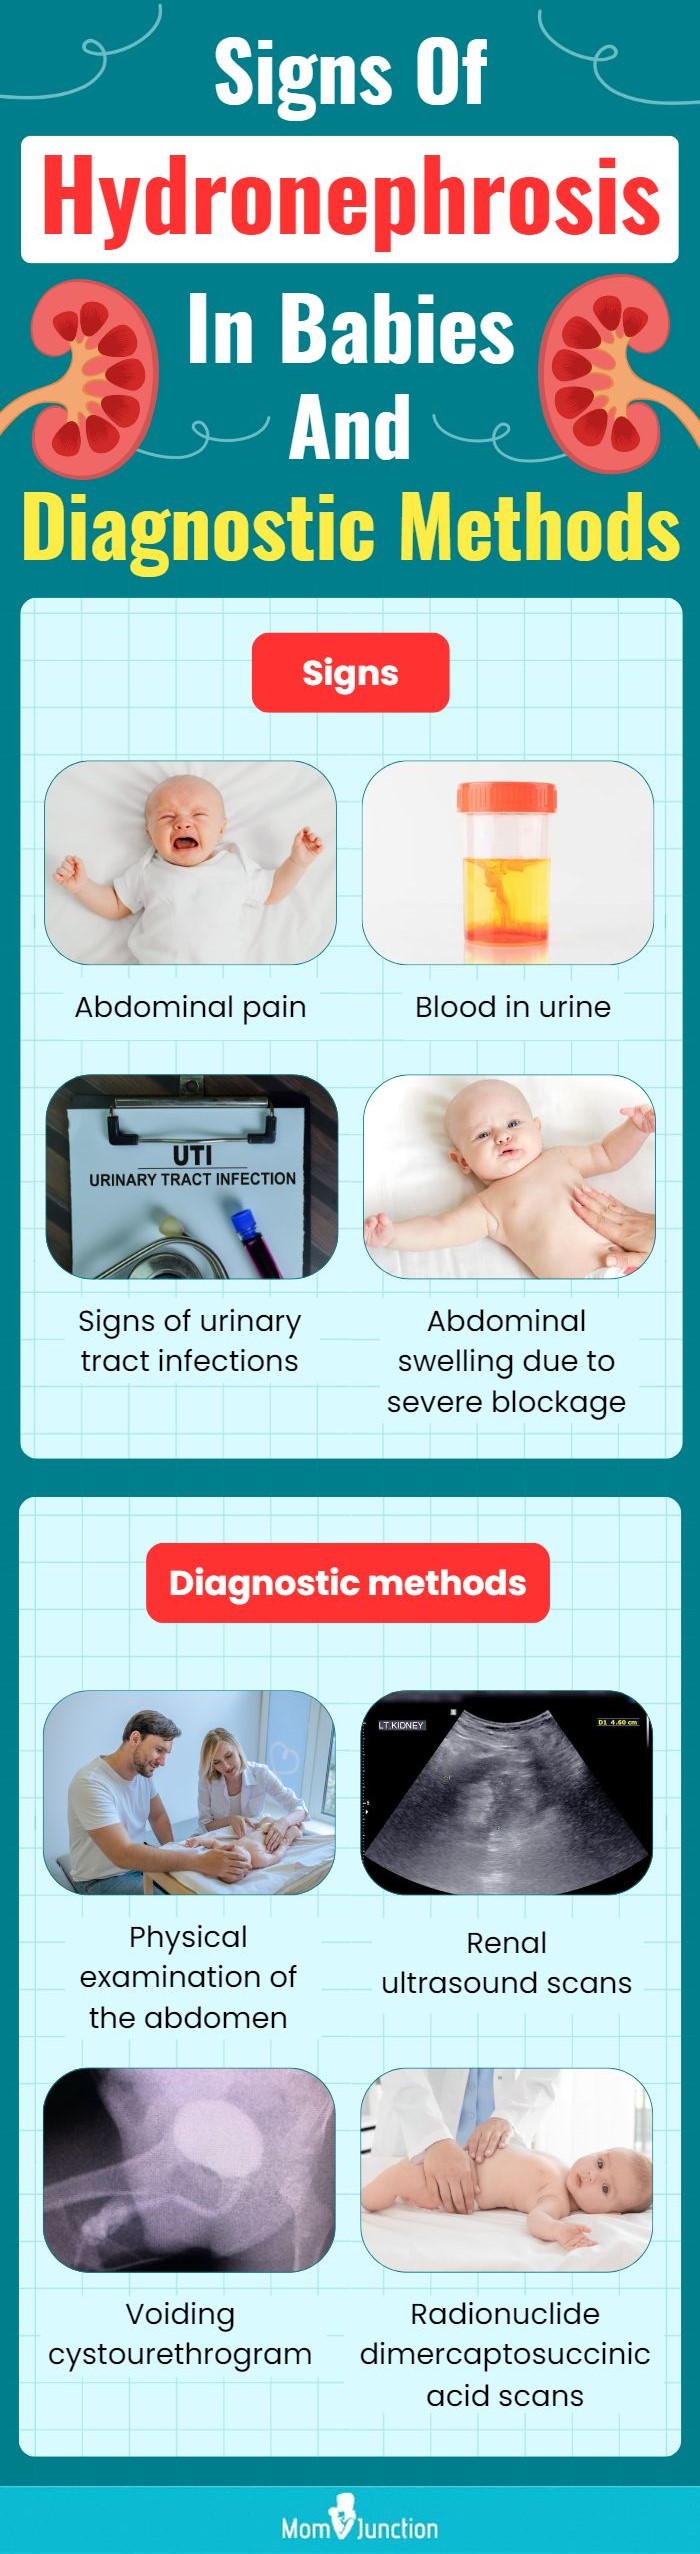 signs of hydronephrosis in babies and diagnostic methods (infographic)